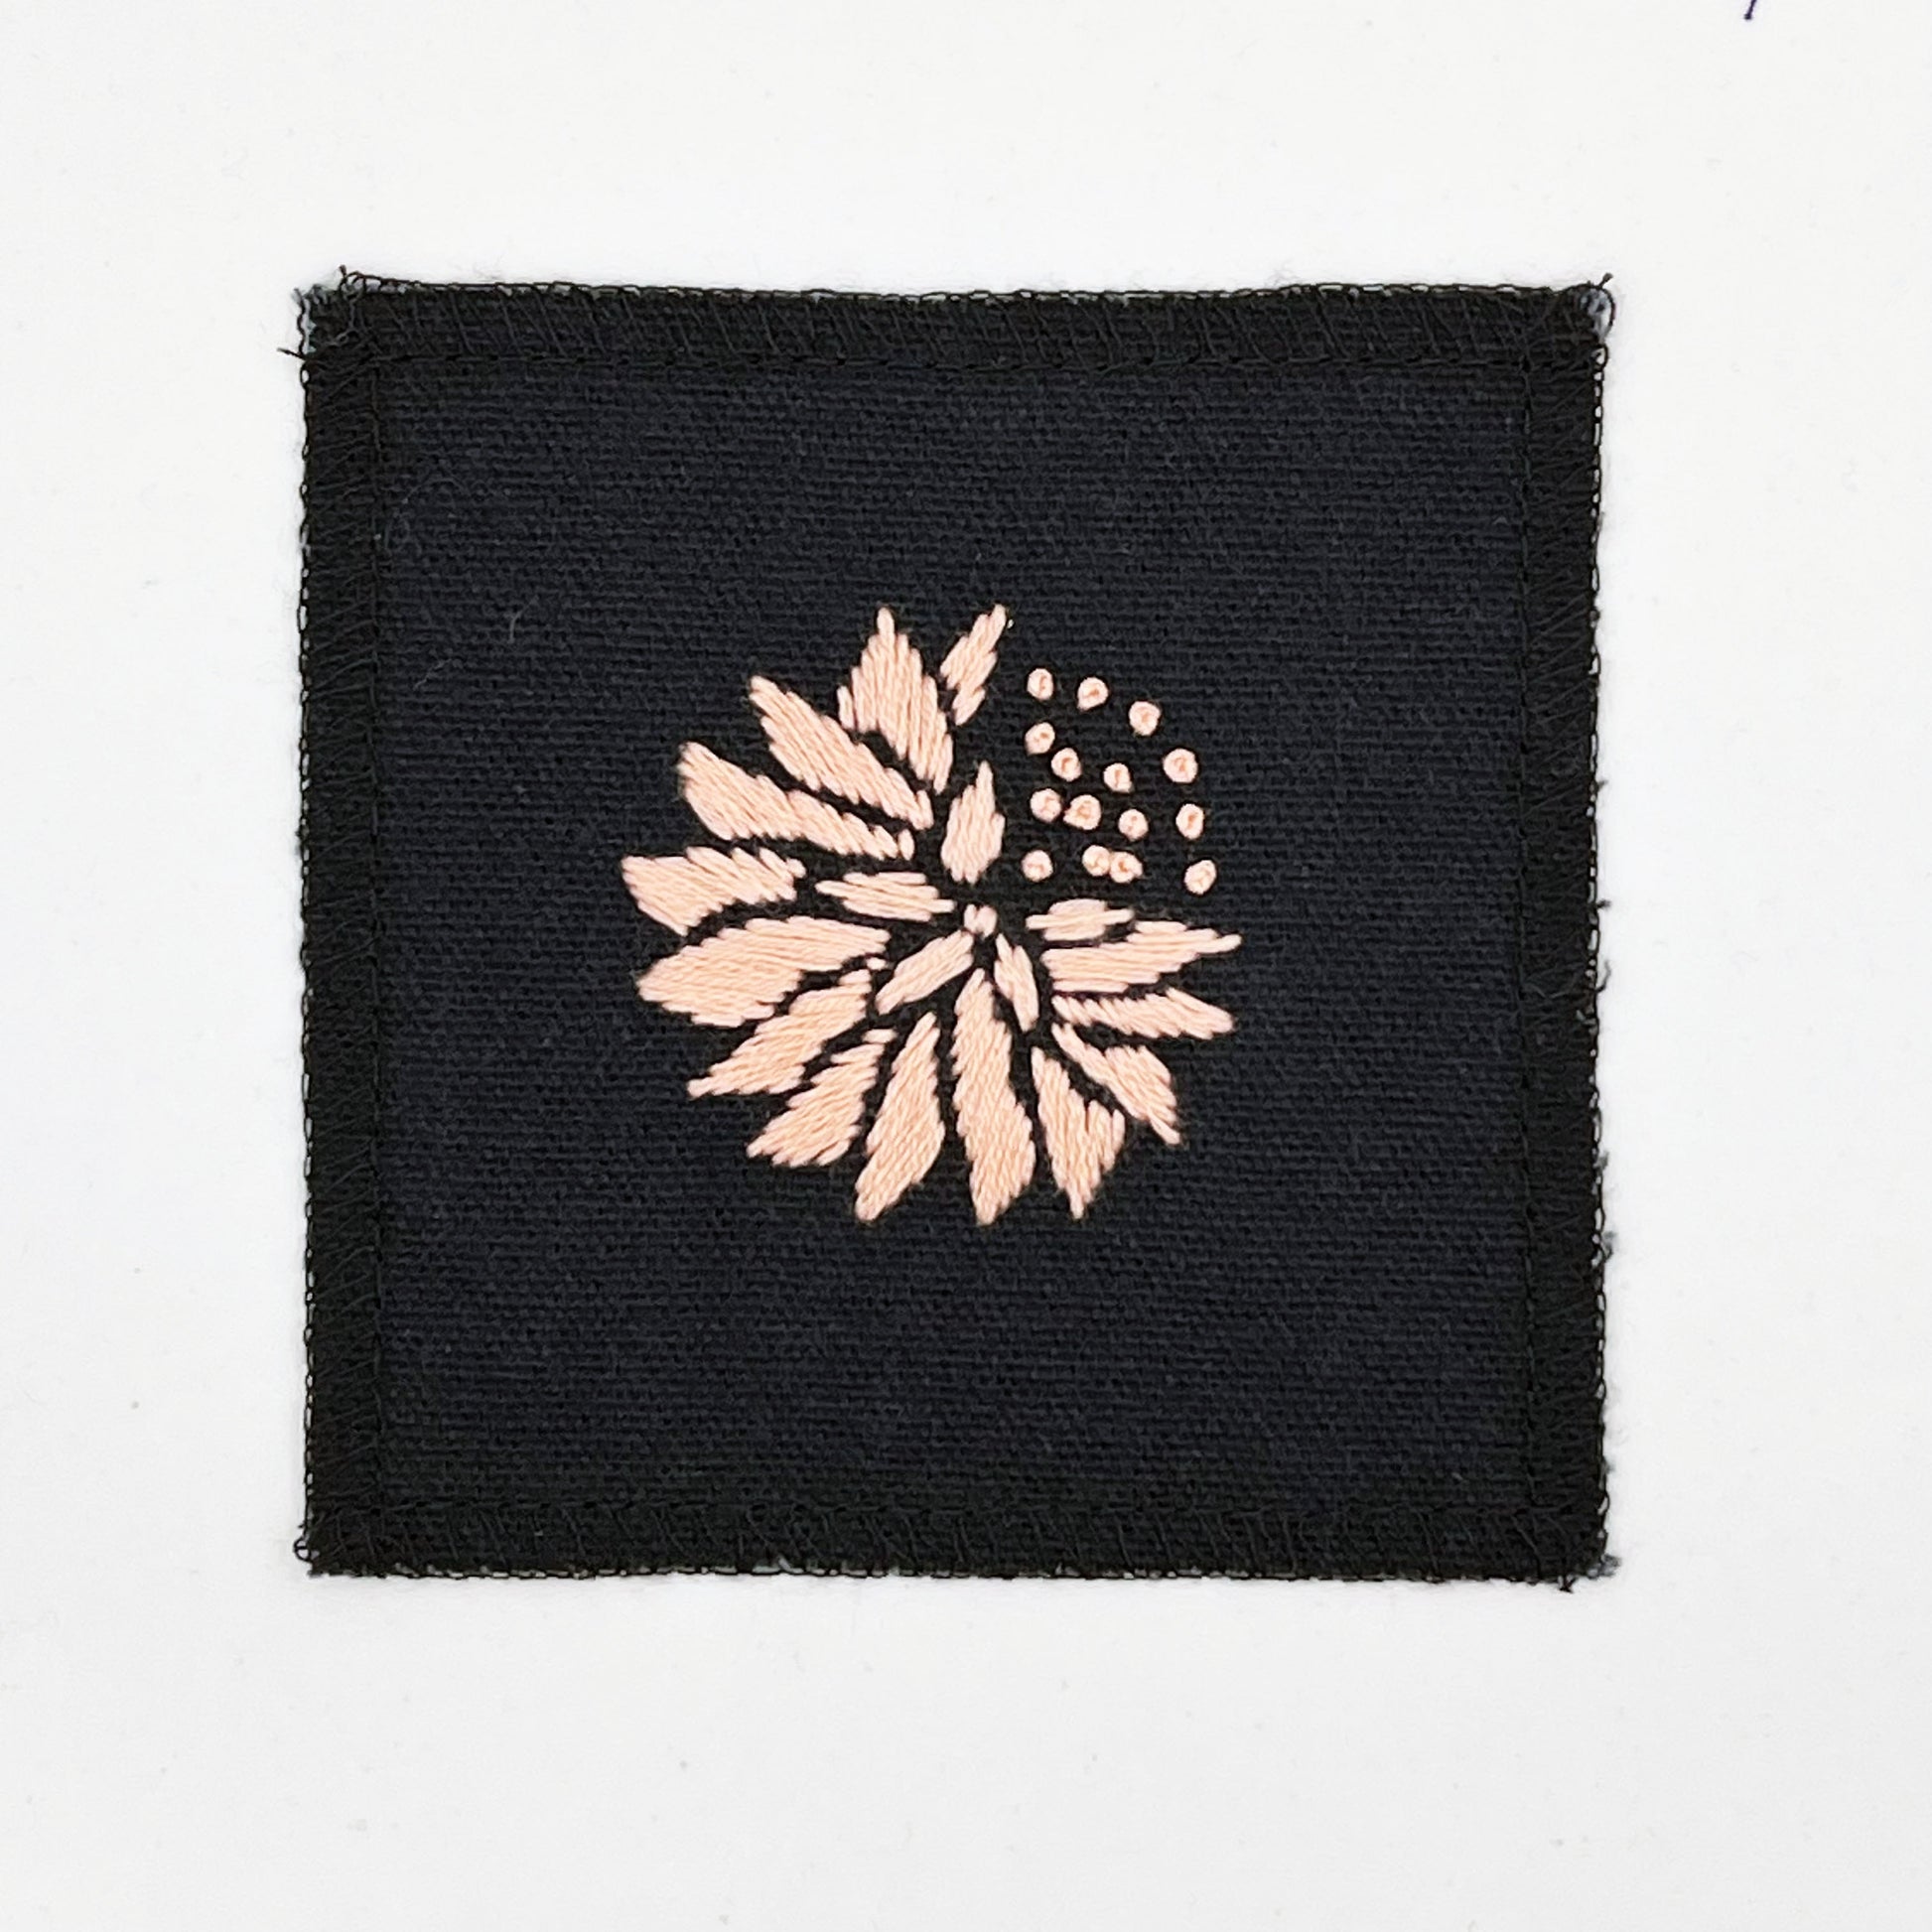 a square patch in black fabric, hand embroidered with a peach colored abstract dandelion made mostly of petals, with a quarter of them replaced with french knots, with overlocked edges, on a white background